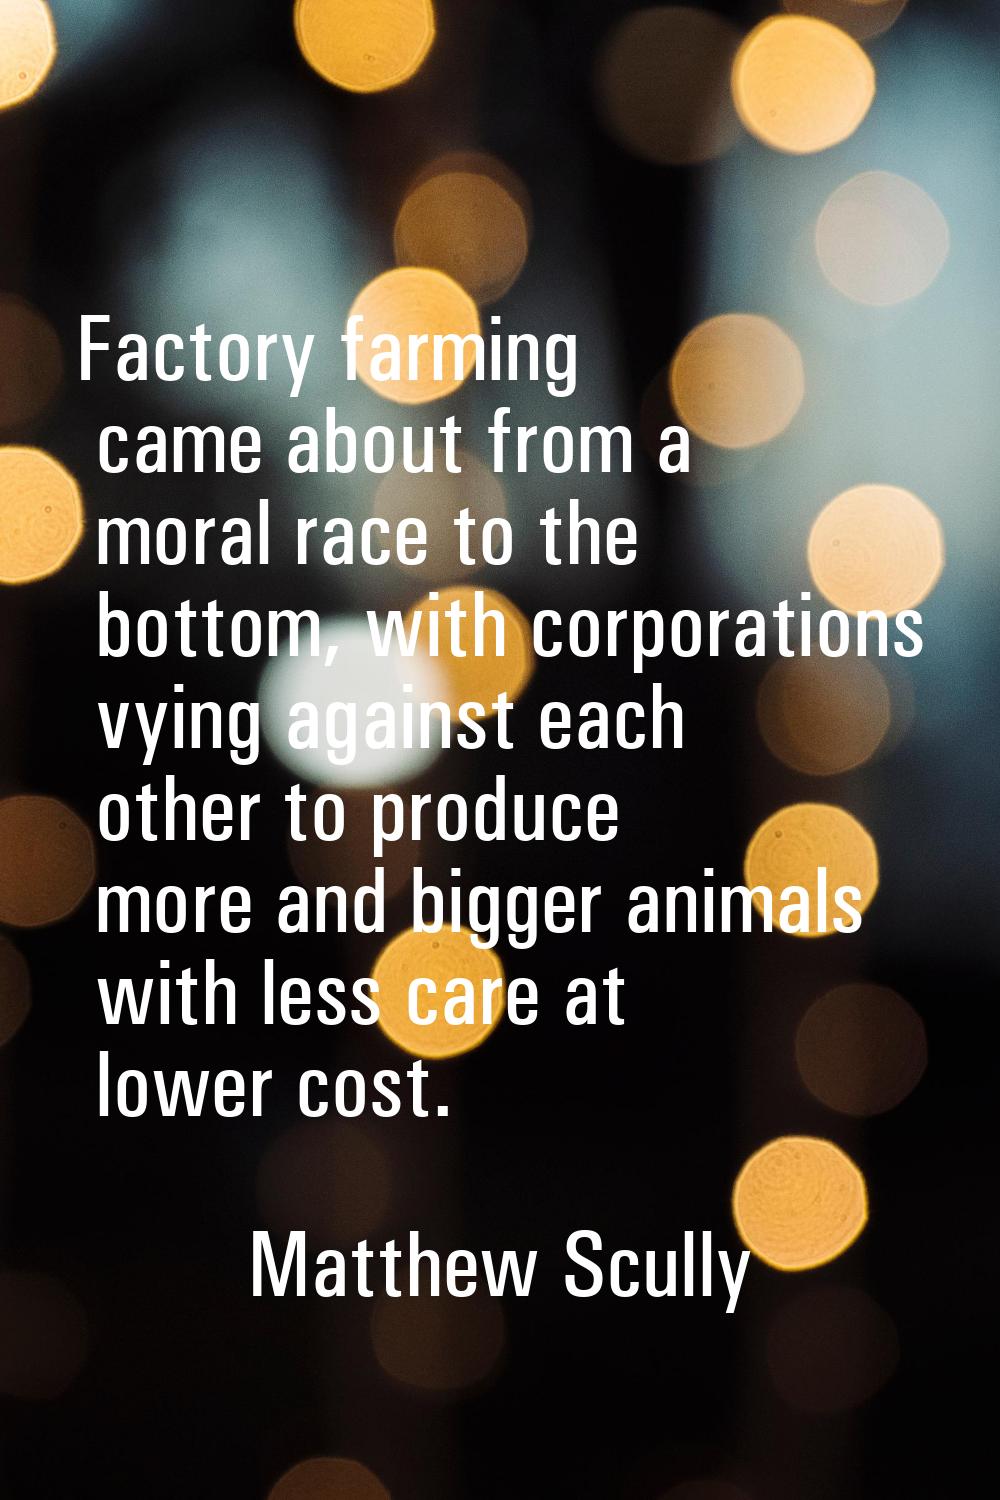 Factory farming came about from a moral race to the bottom, with corporations vying against each ot